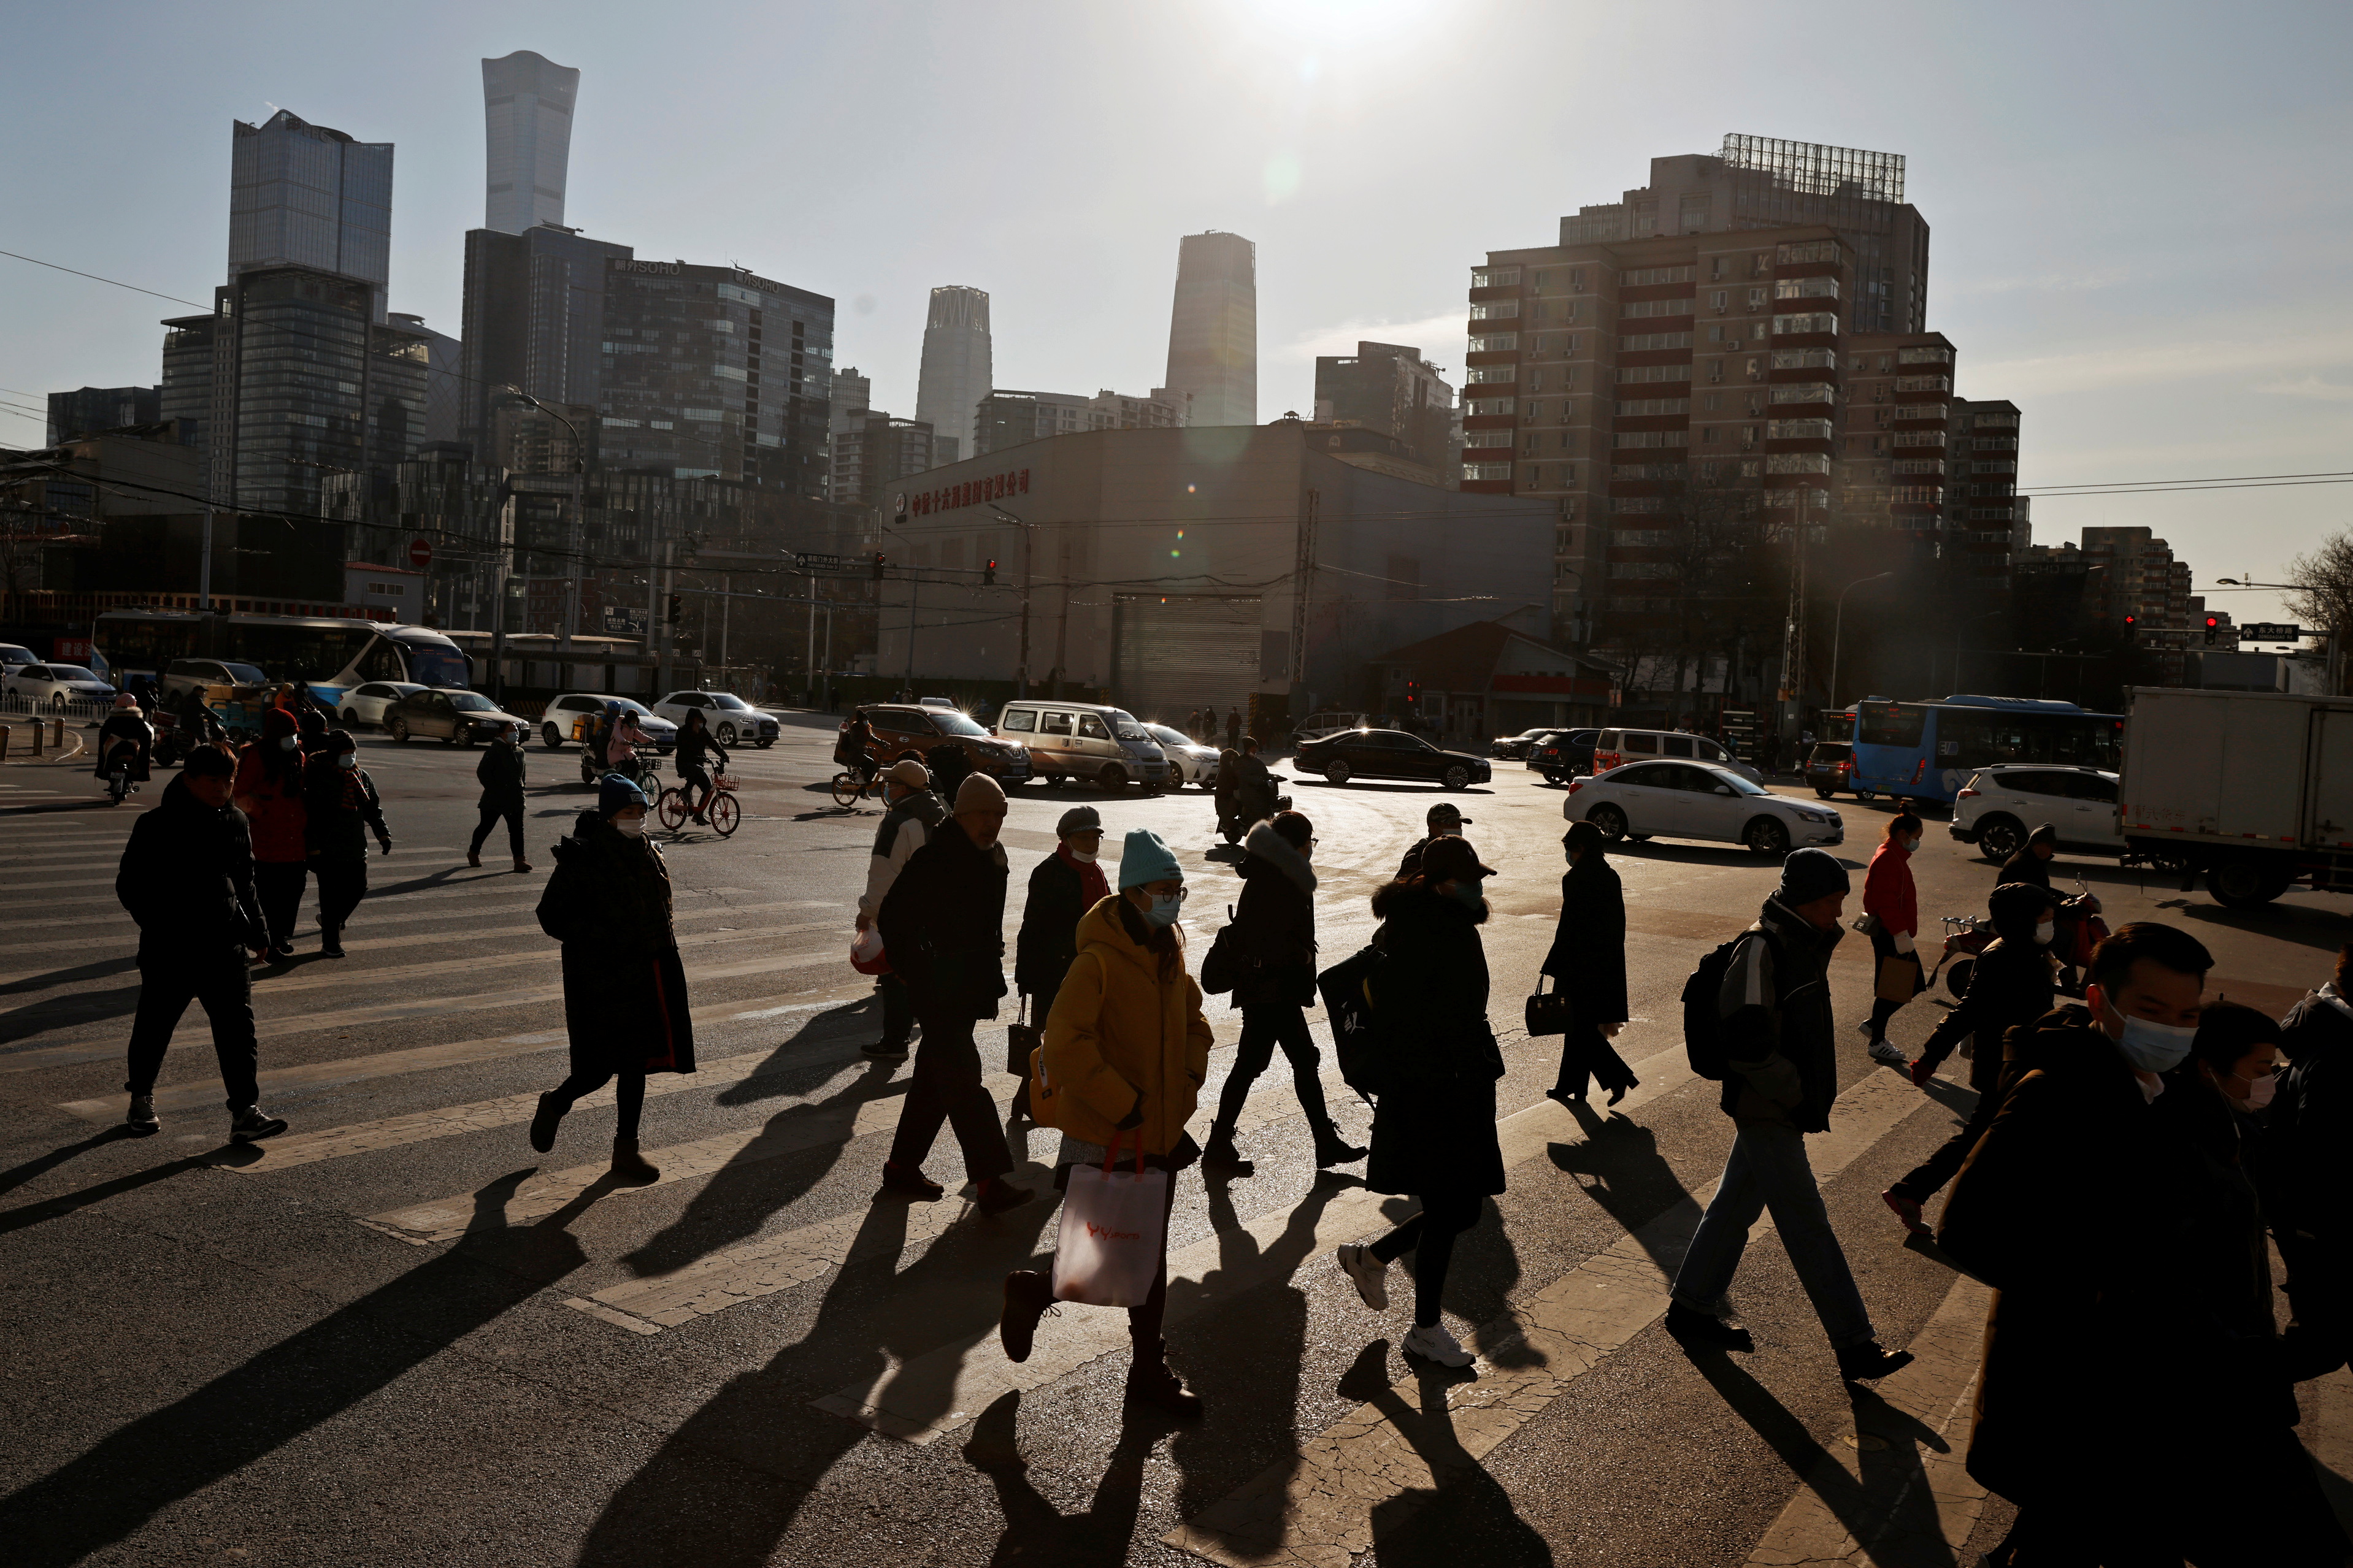 People cross a street during morning rush hour in front of the skyline of the CBD in Beijing